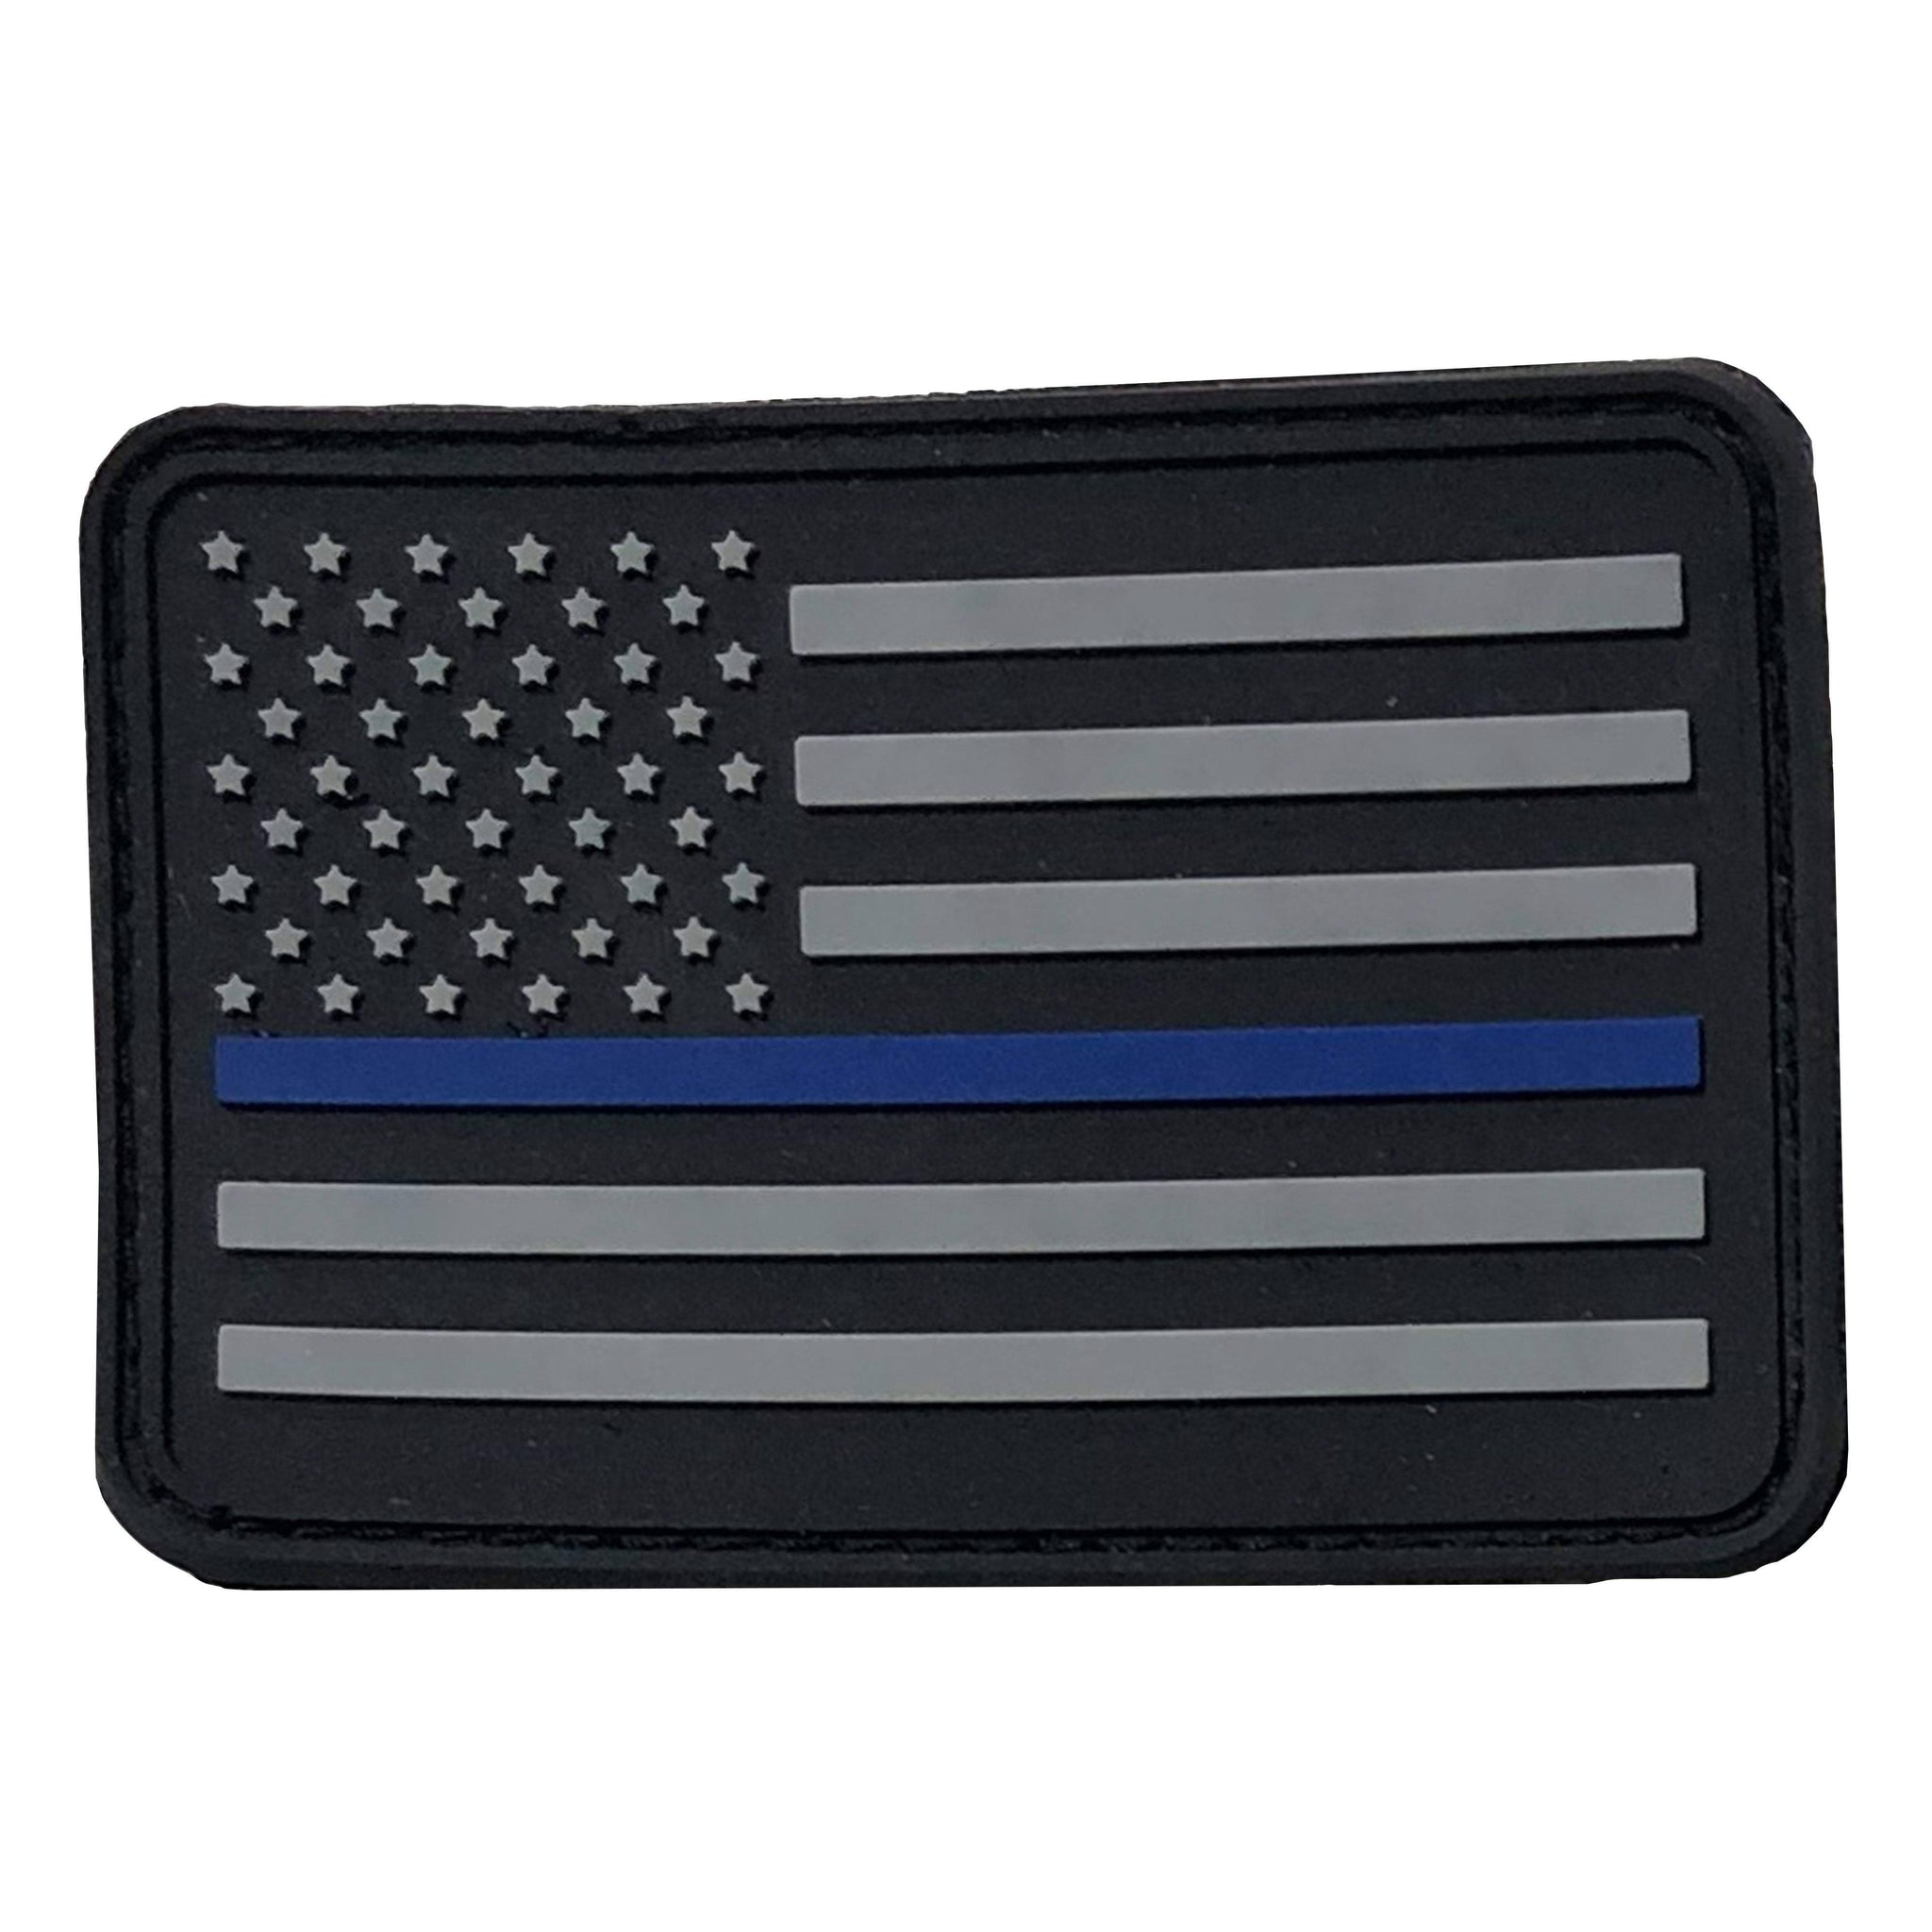 The Thin Blue Line Flag Patch - PVC Rubber w Velcro Hook Backing